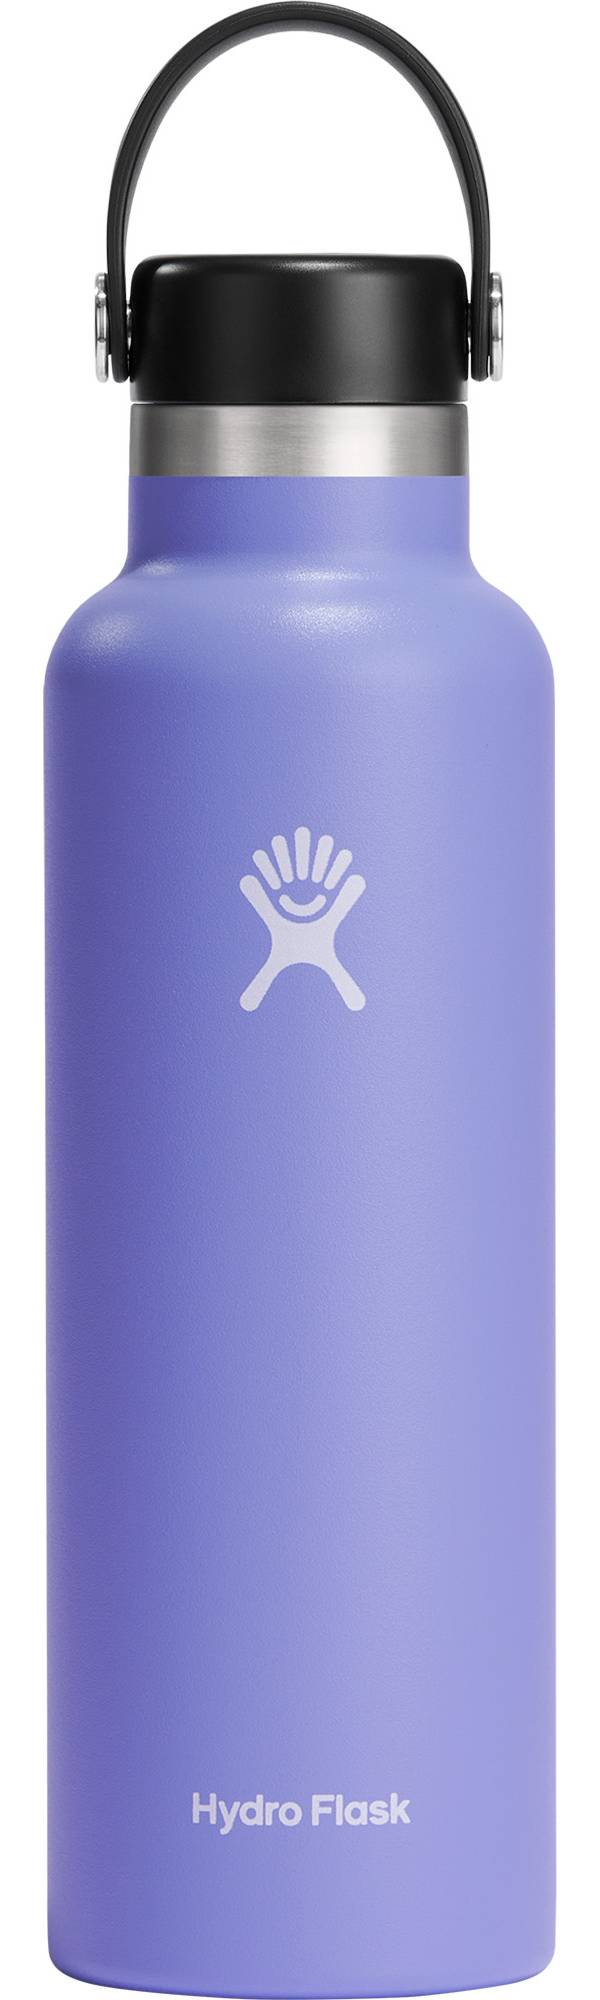 Hydro Flask Standard Mouth 21 oz. Bottle with Flex Cap product image